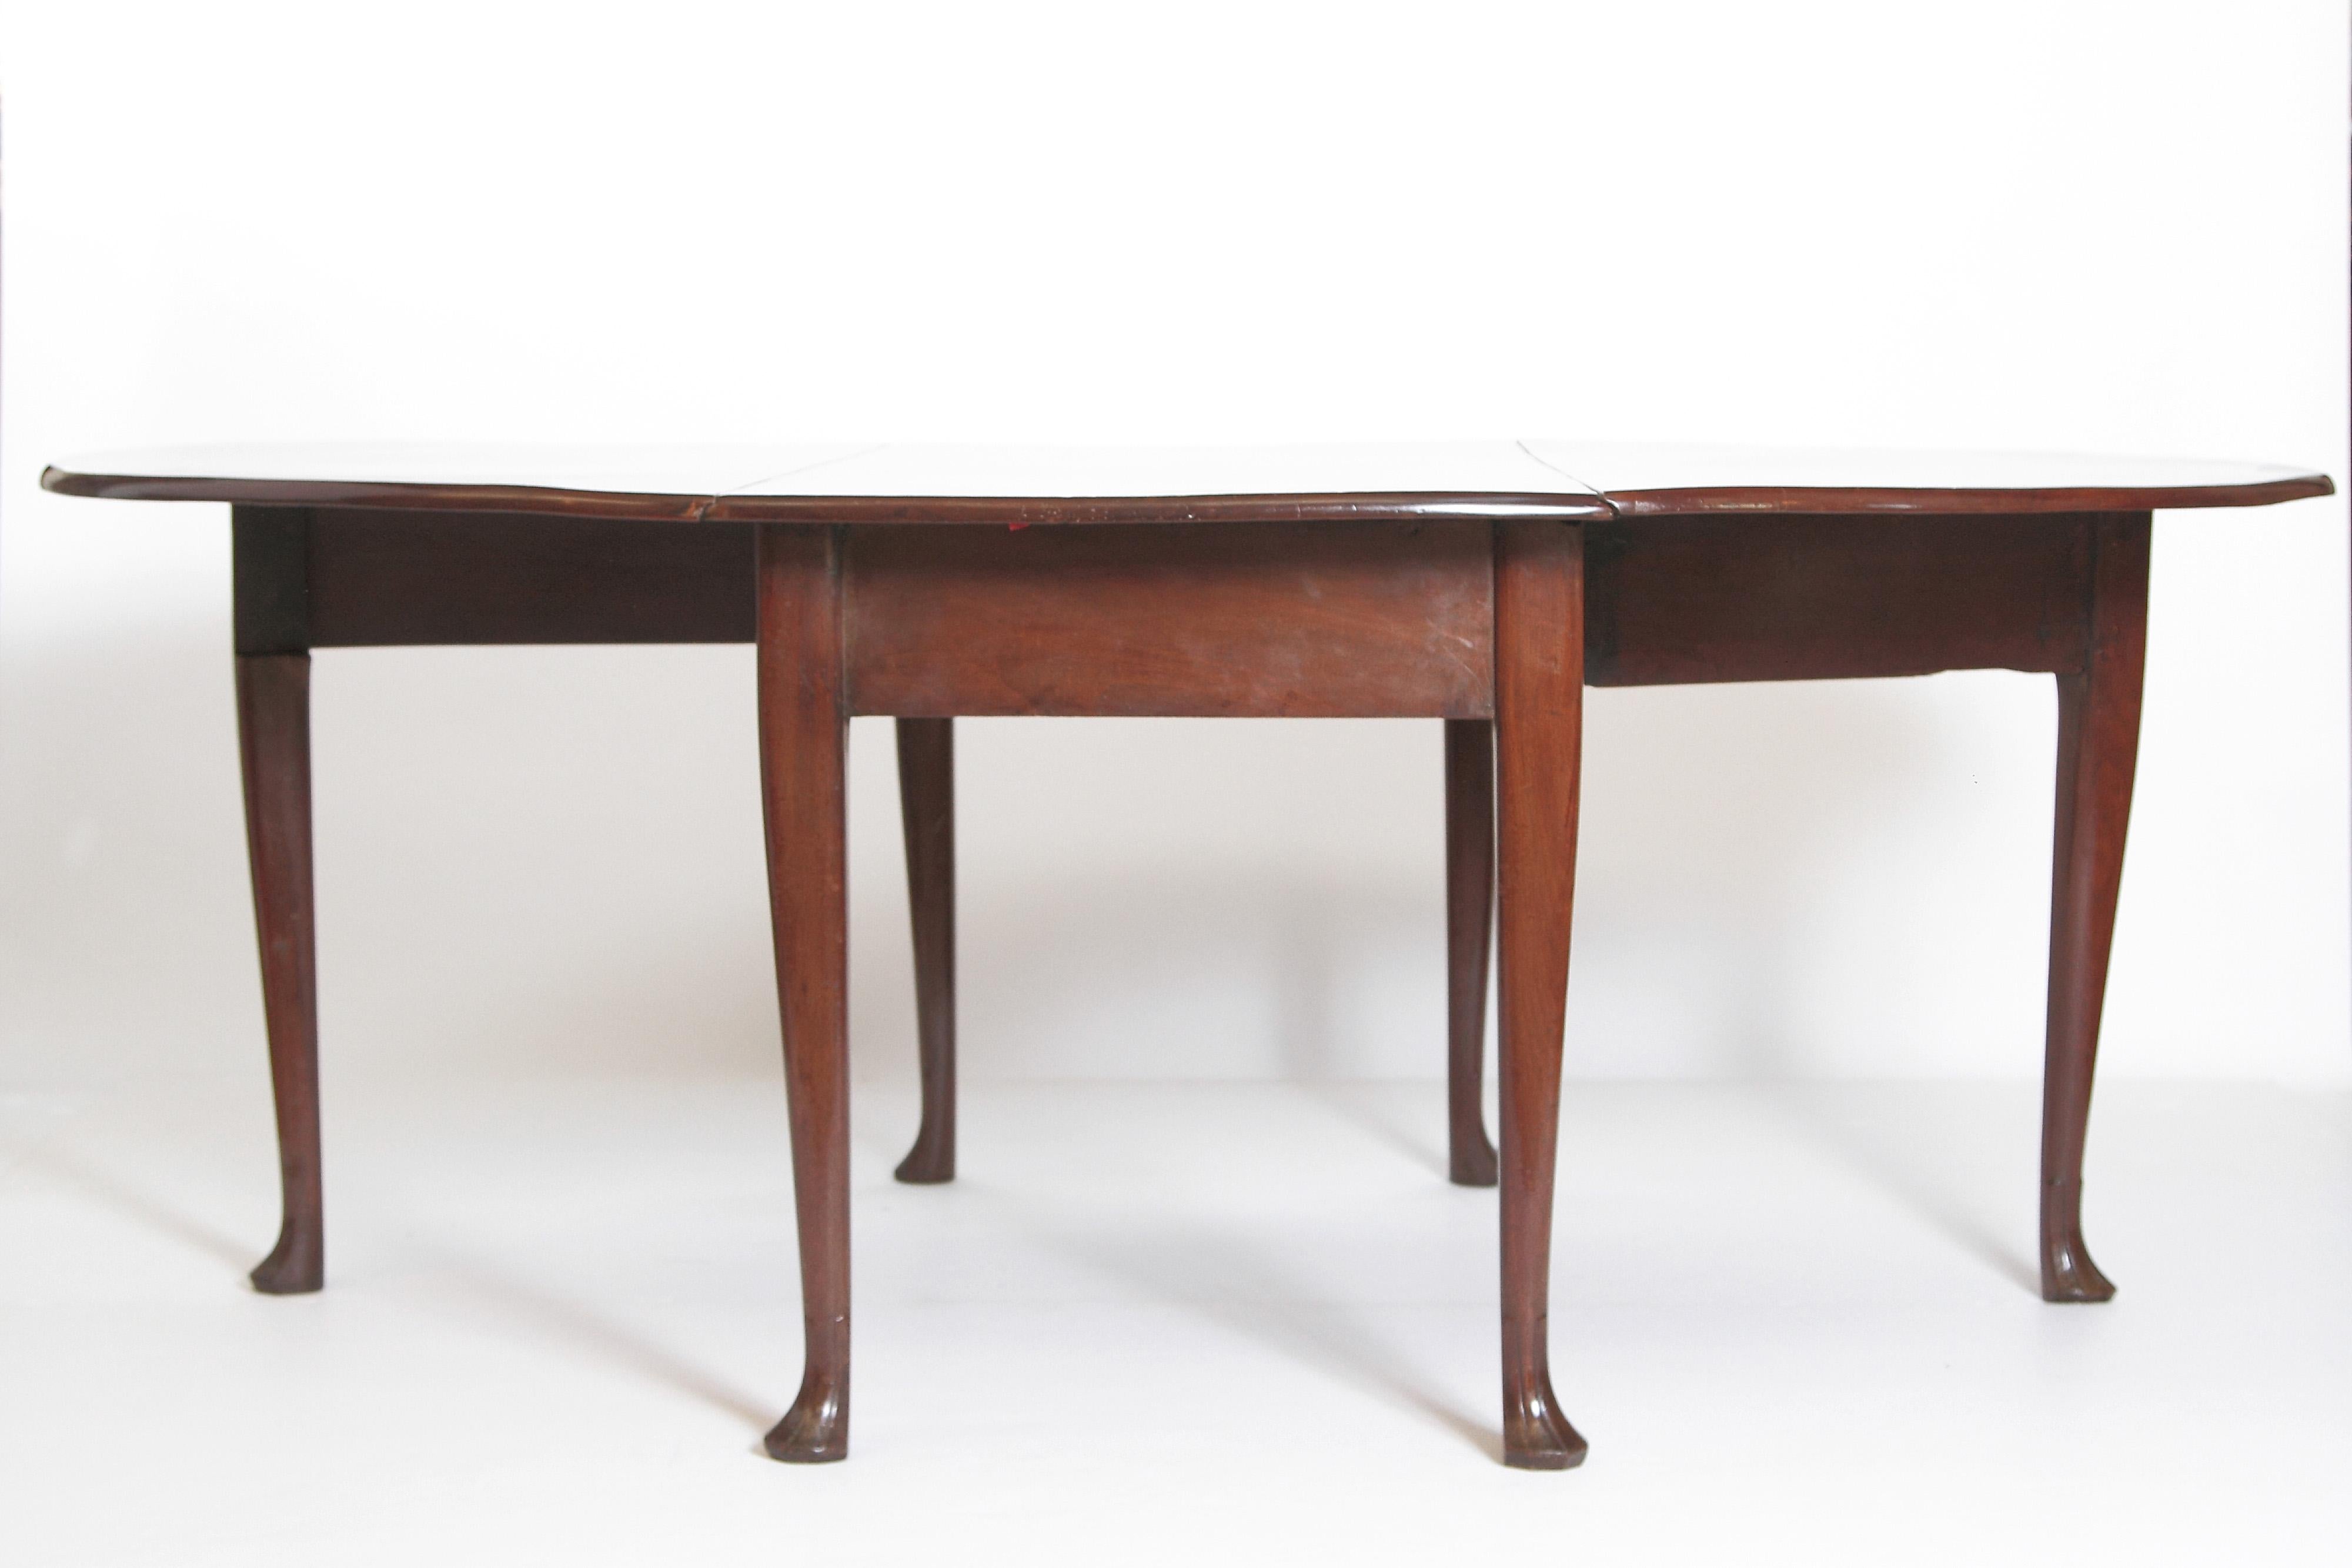 George II drop-leaf dining table in a beautifully grained mahogany with the legs terminating in Spanish feet. Measurements with leaves down: 61.5 D x 27 W x 29.5 H.